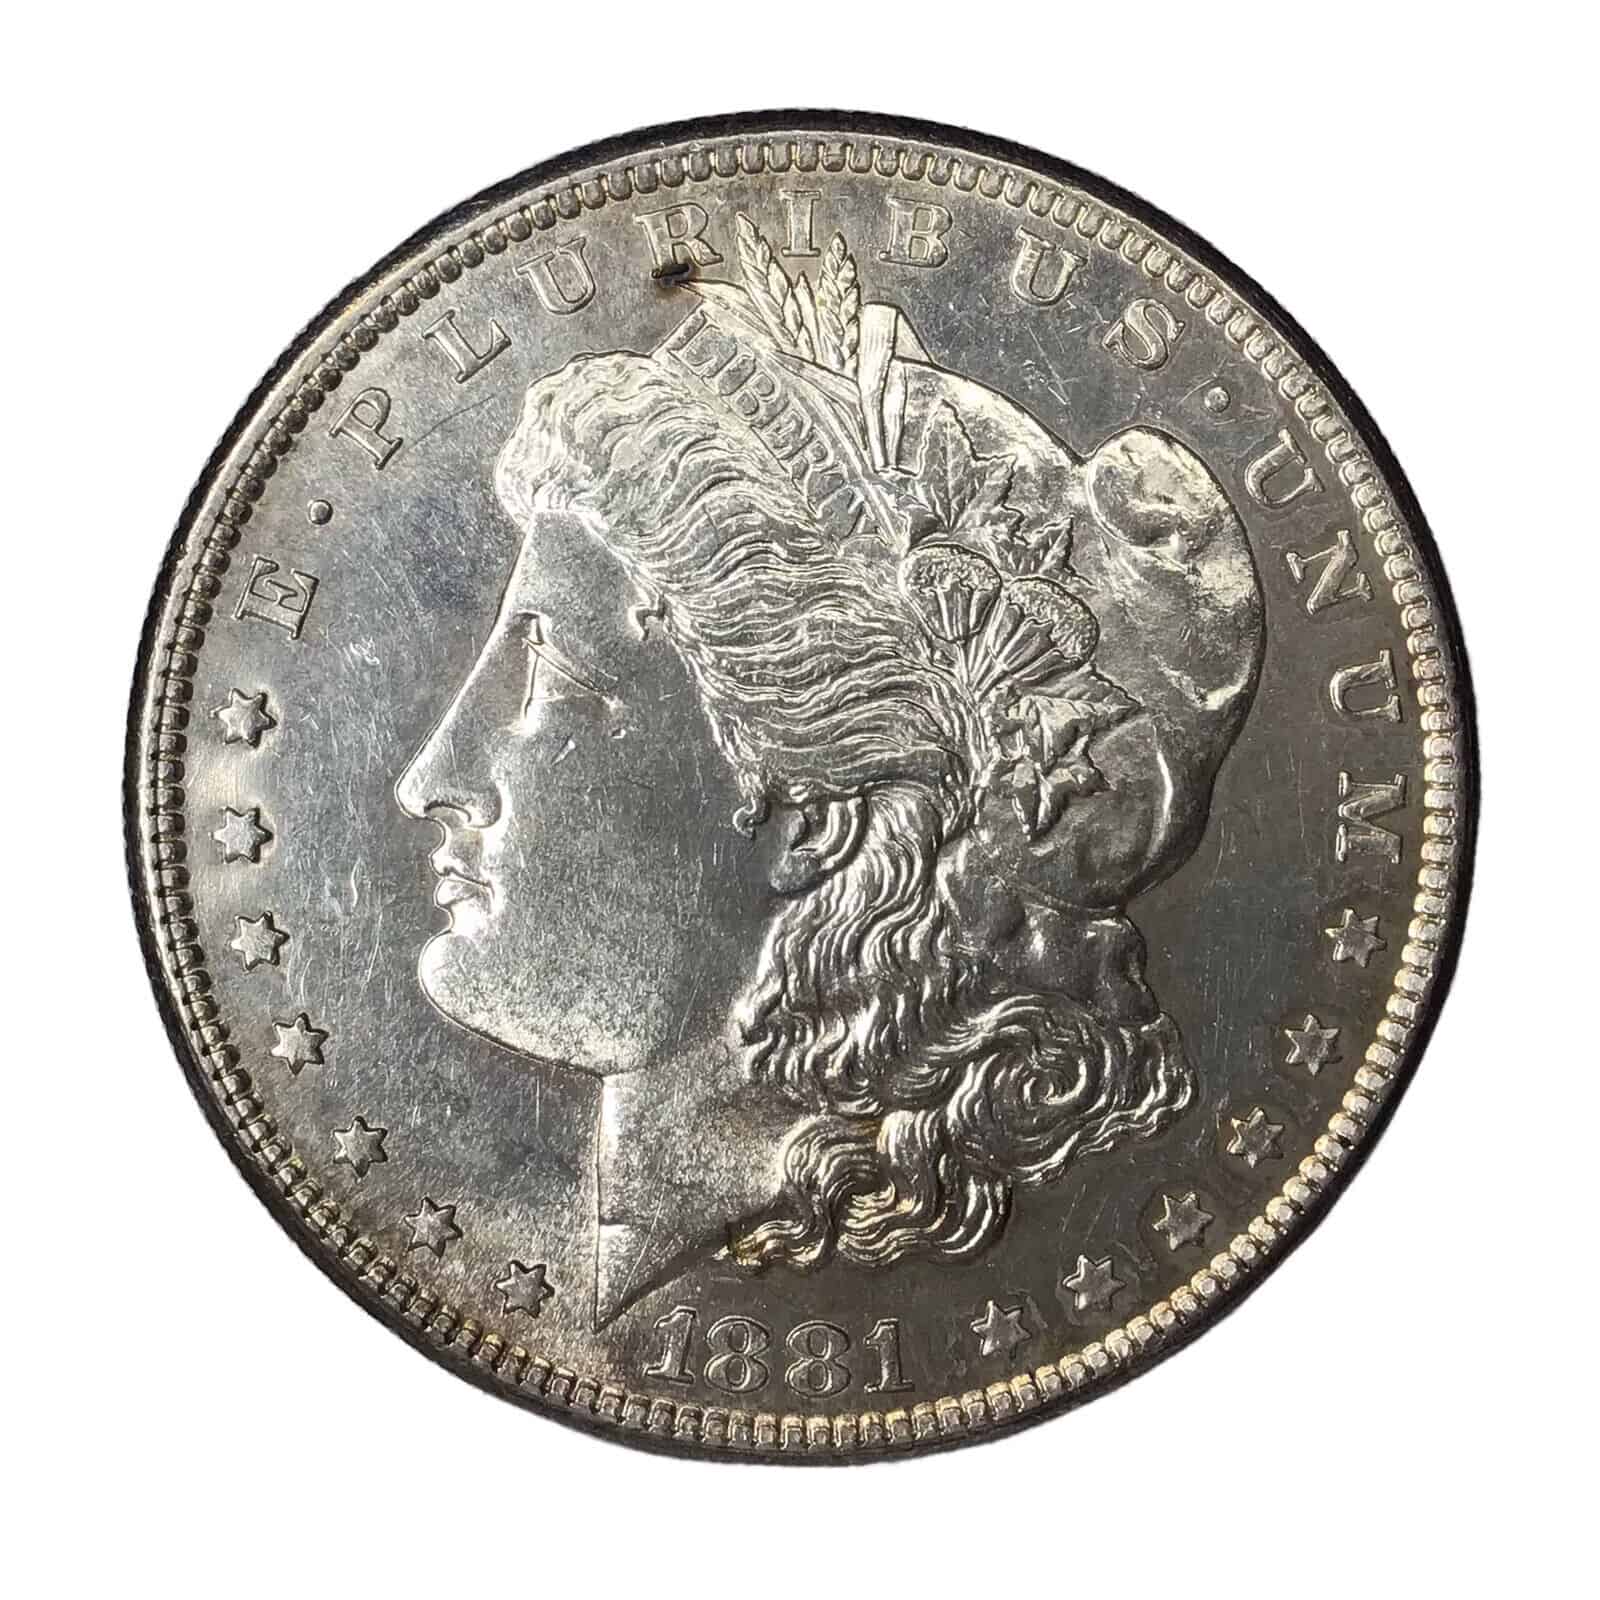 The Obverse of the 1881 Silver Dollar